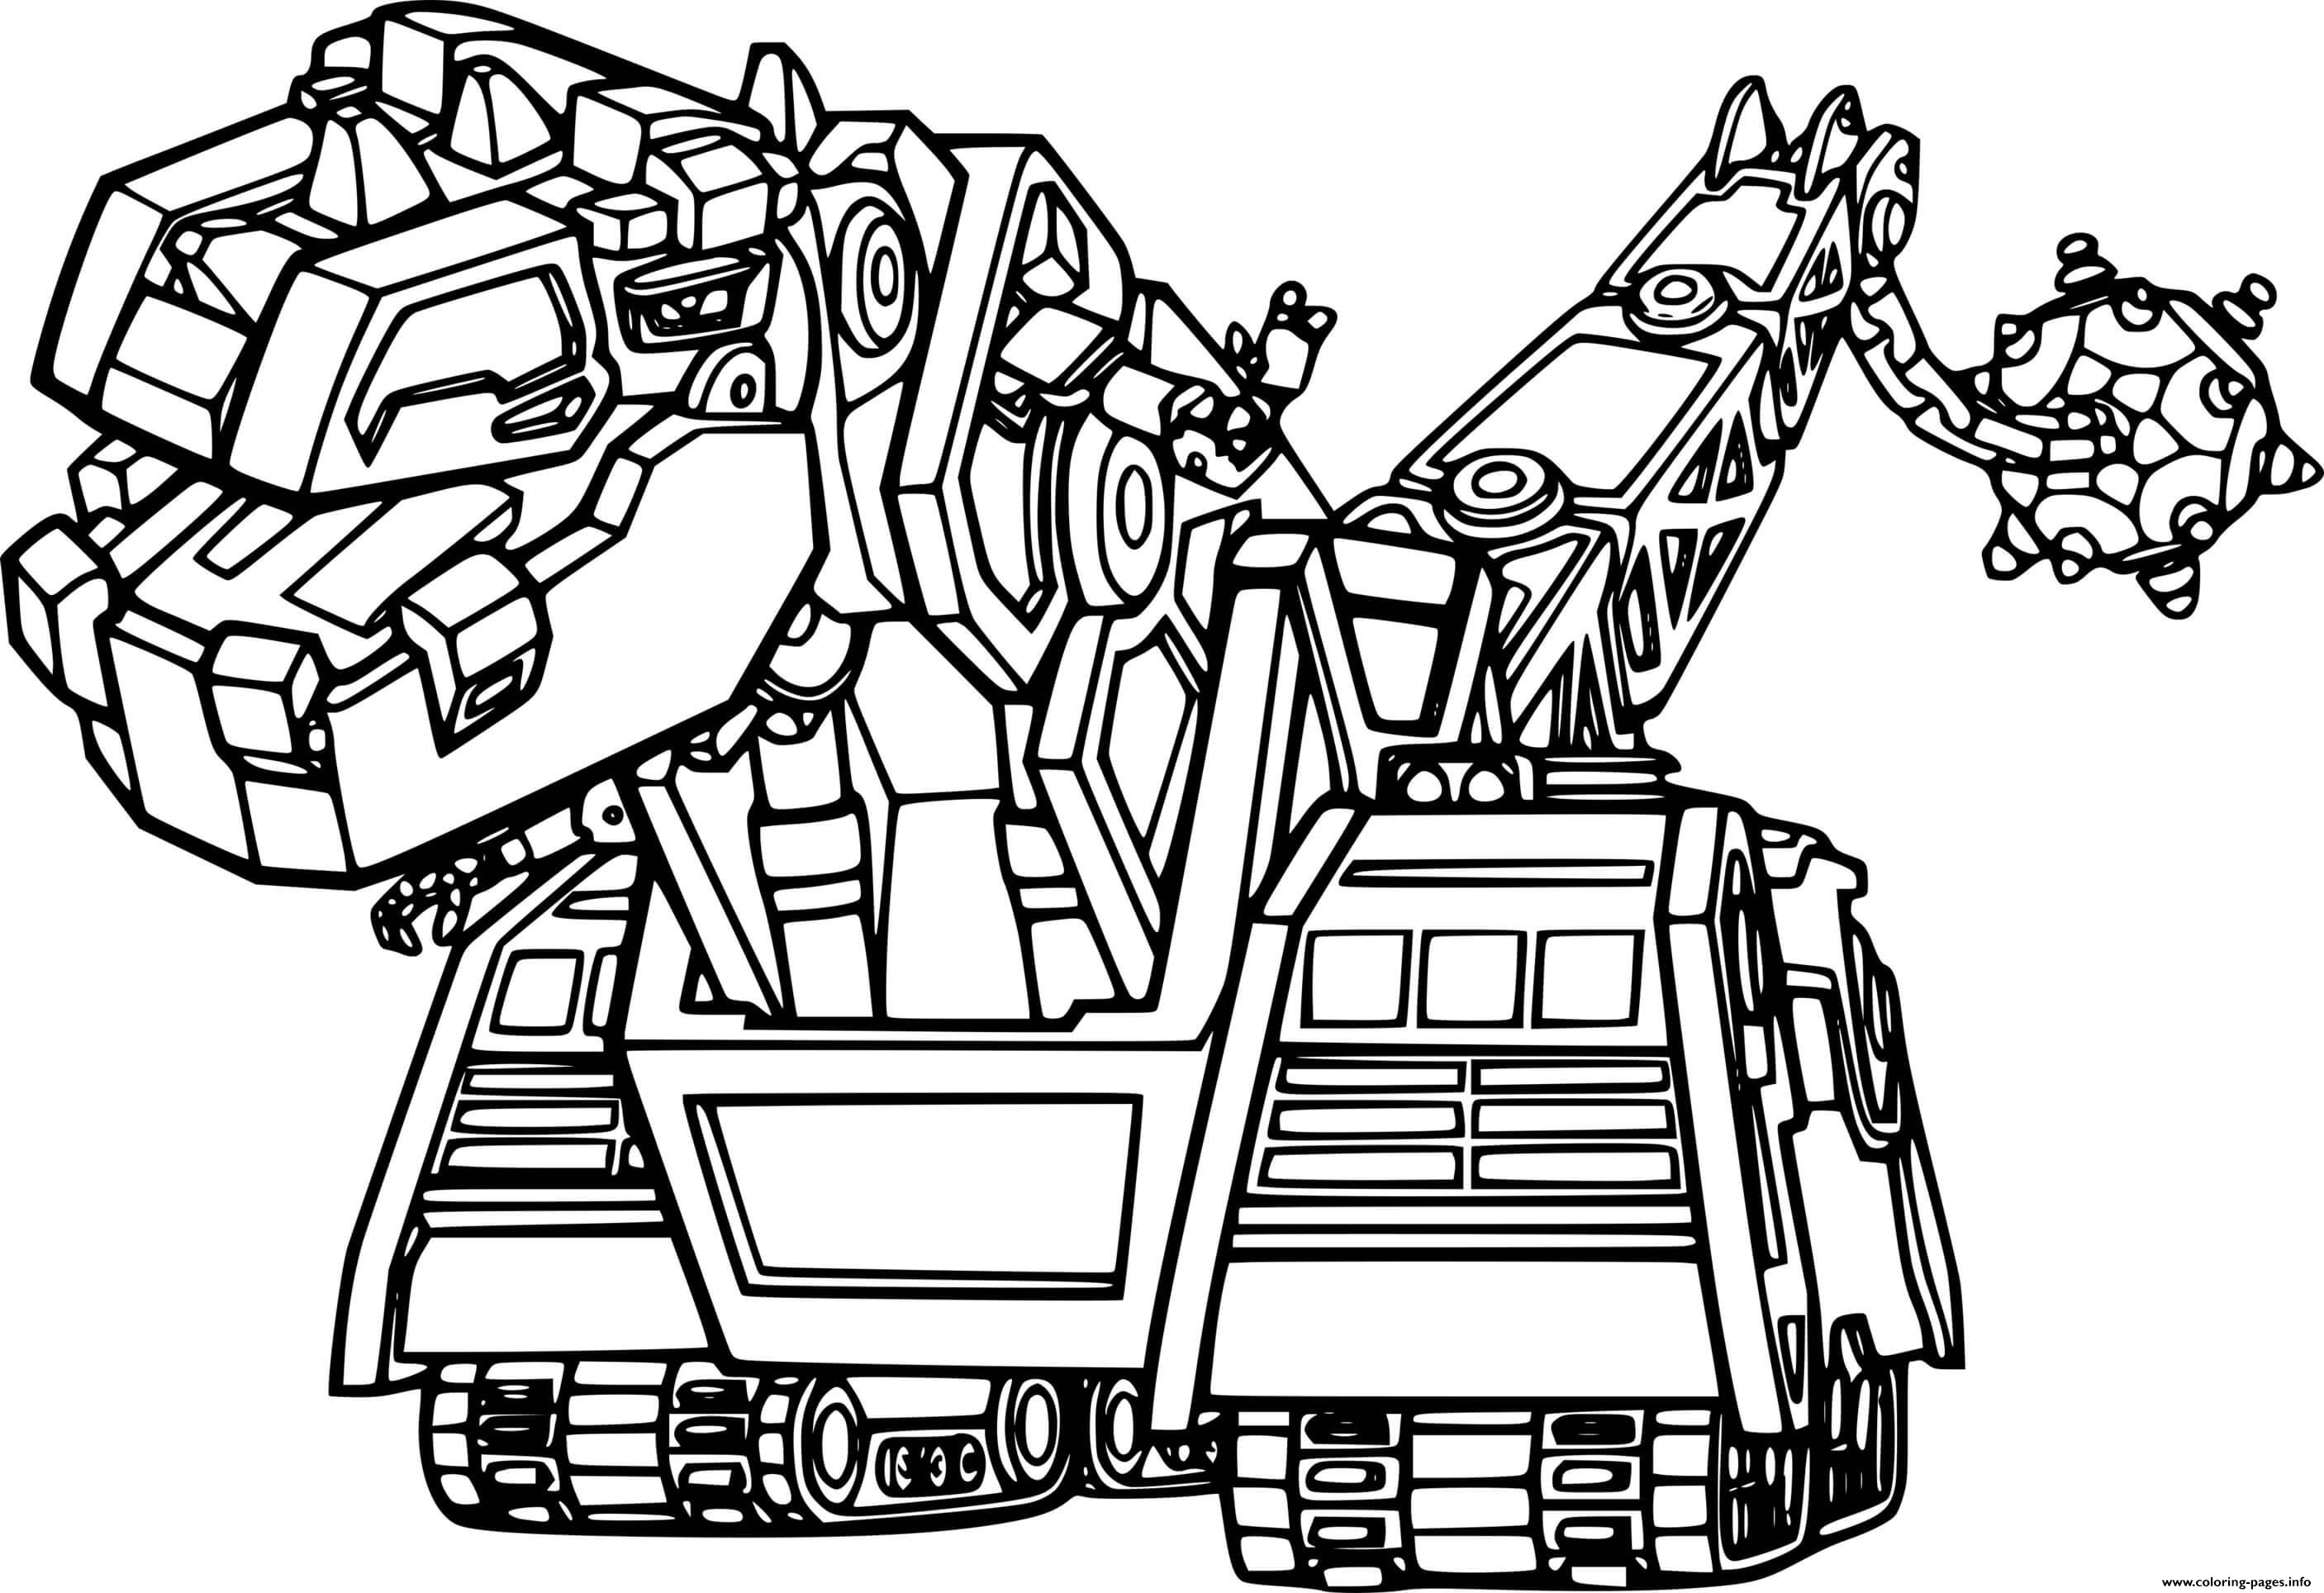 D Structs From Dinotrux coloring